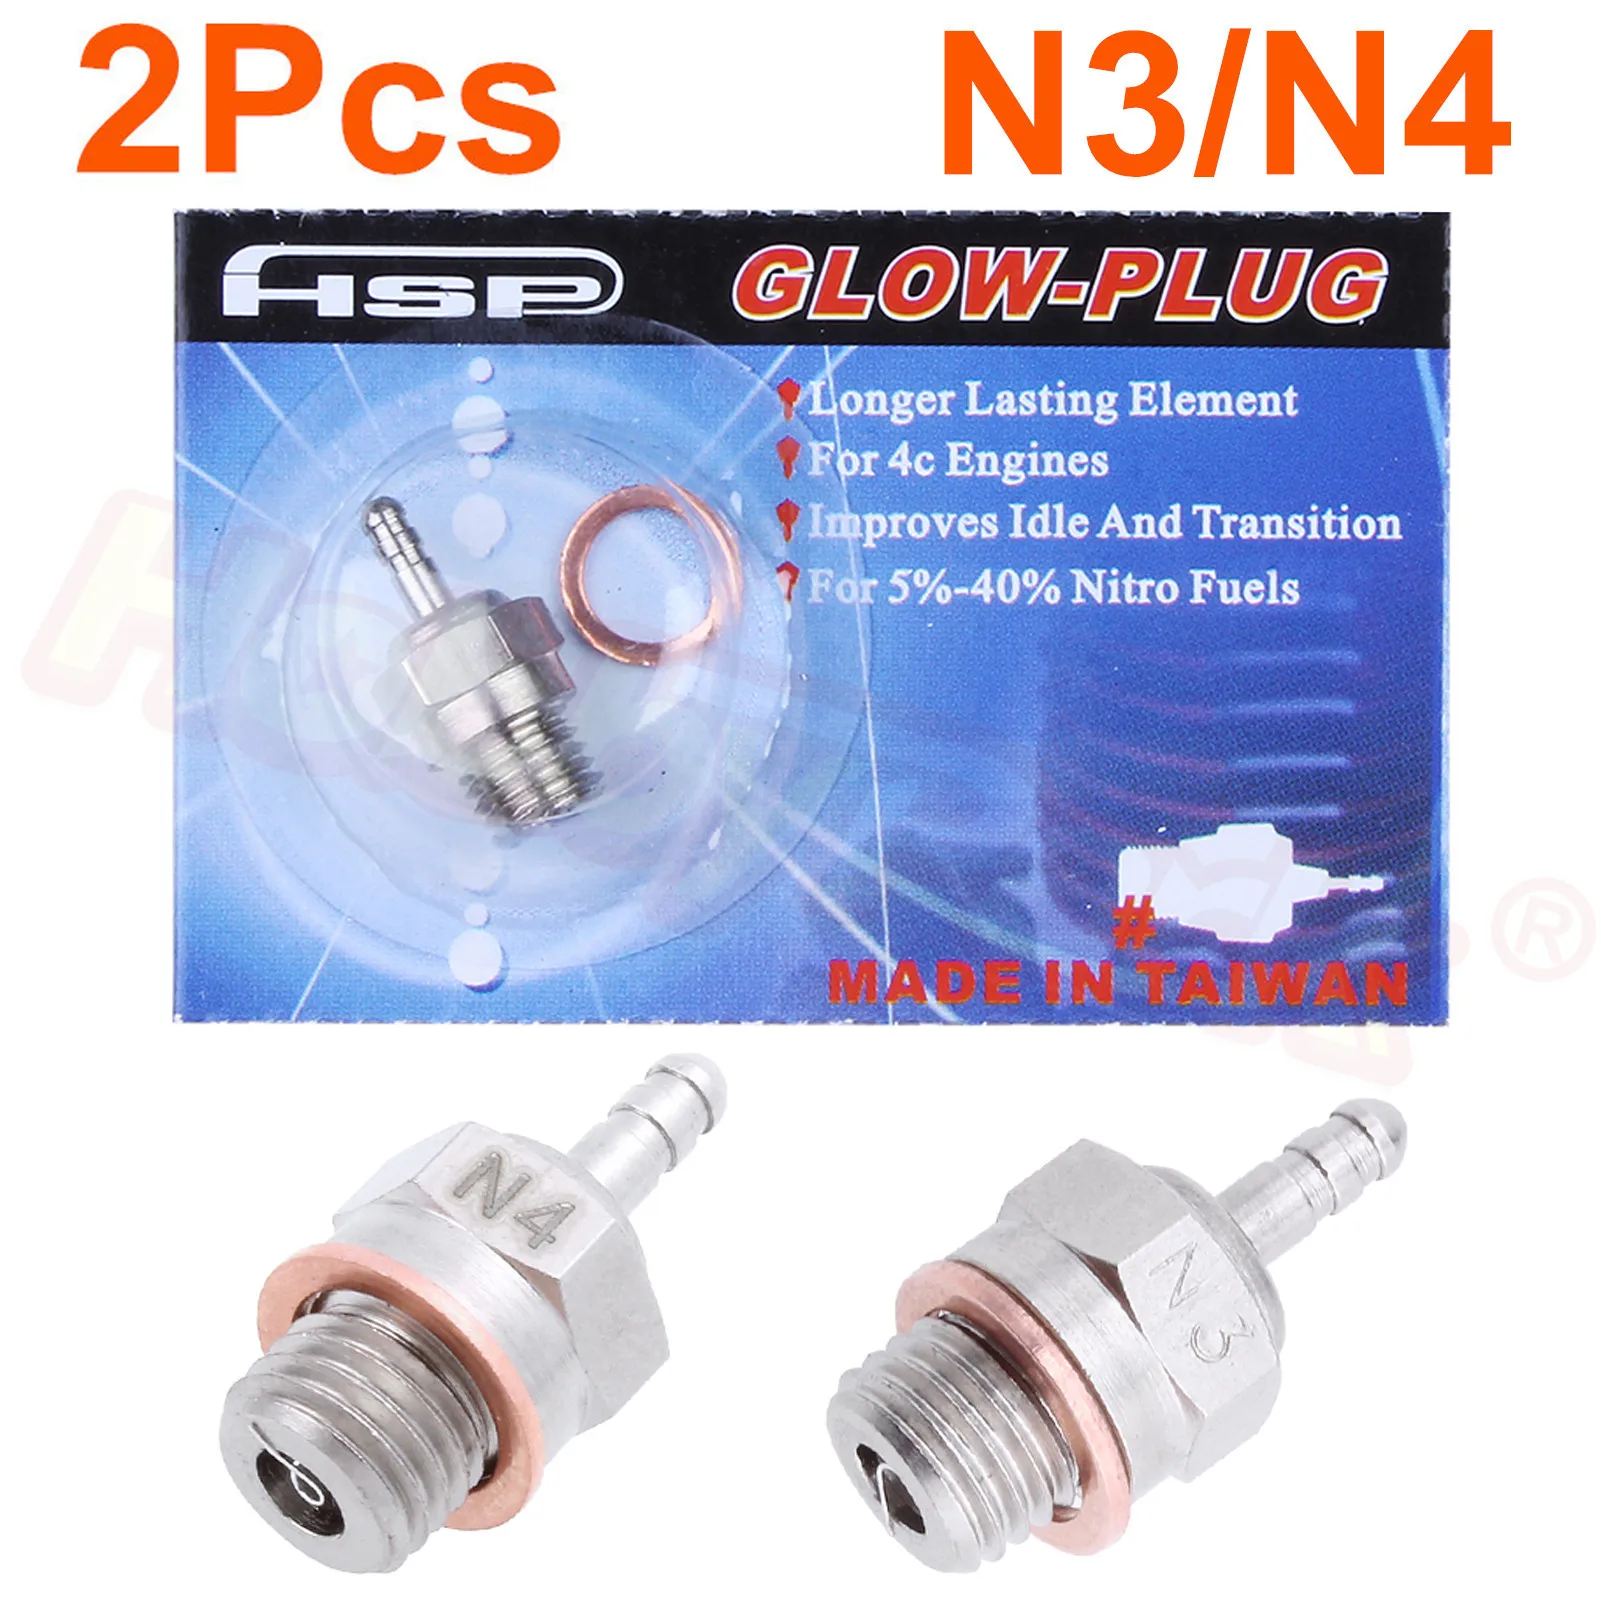 LyGuy HSP N3 N4 Glow Plug 70117 For RC Remote Control Nitro Cars Model 4C Engines Glow plug,Rubber ring Gift For Kids 